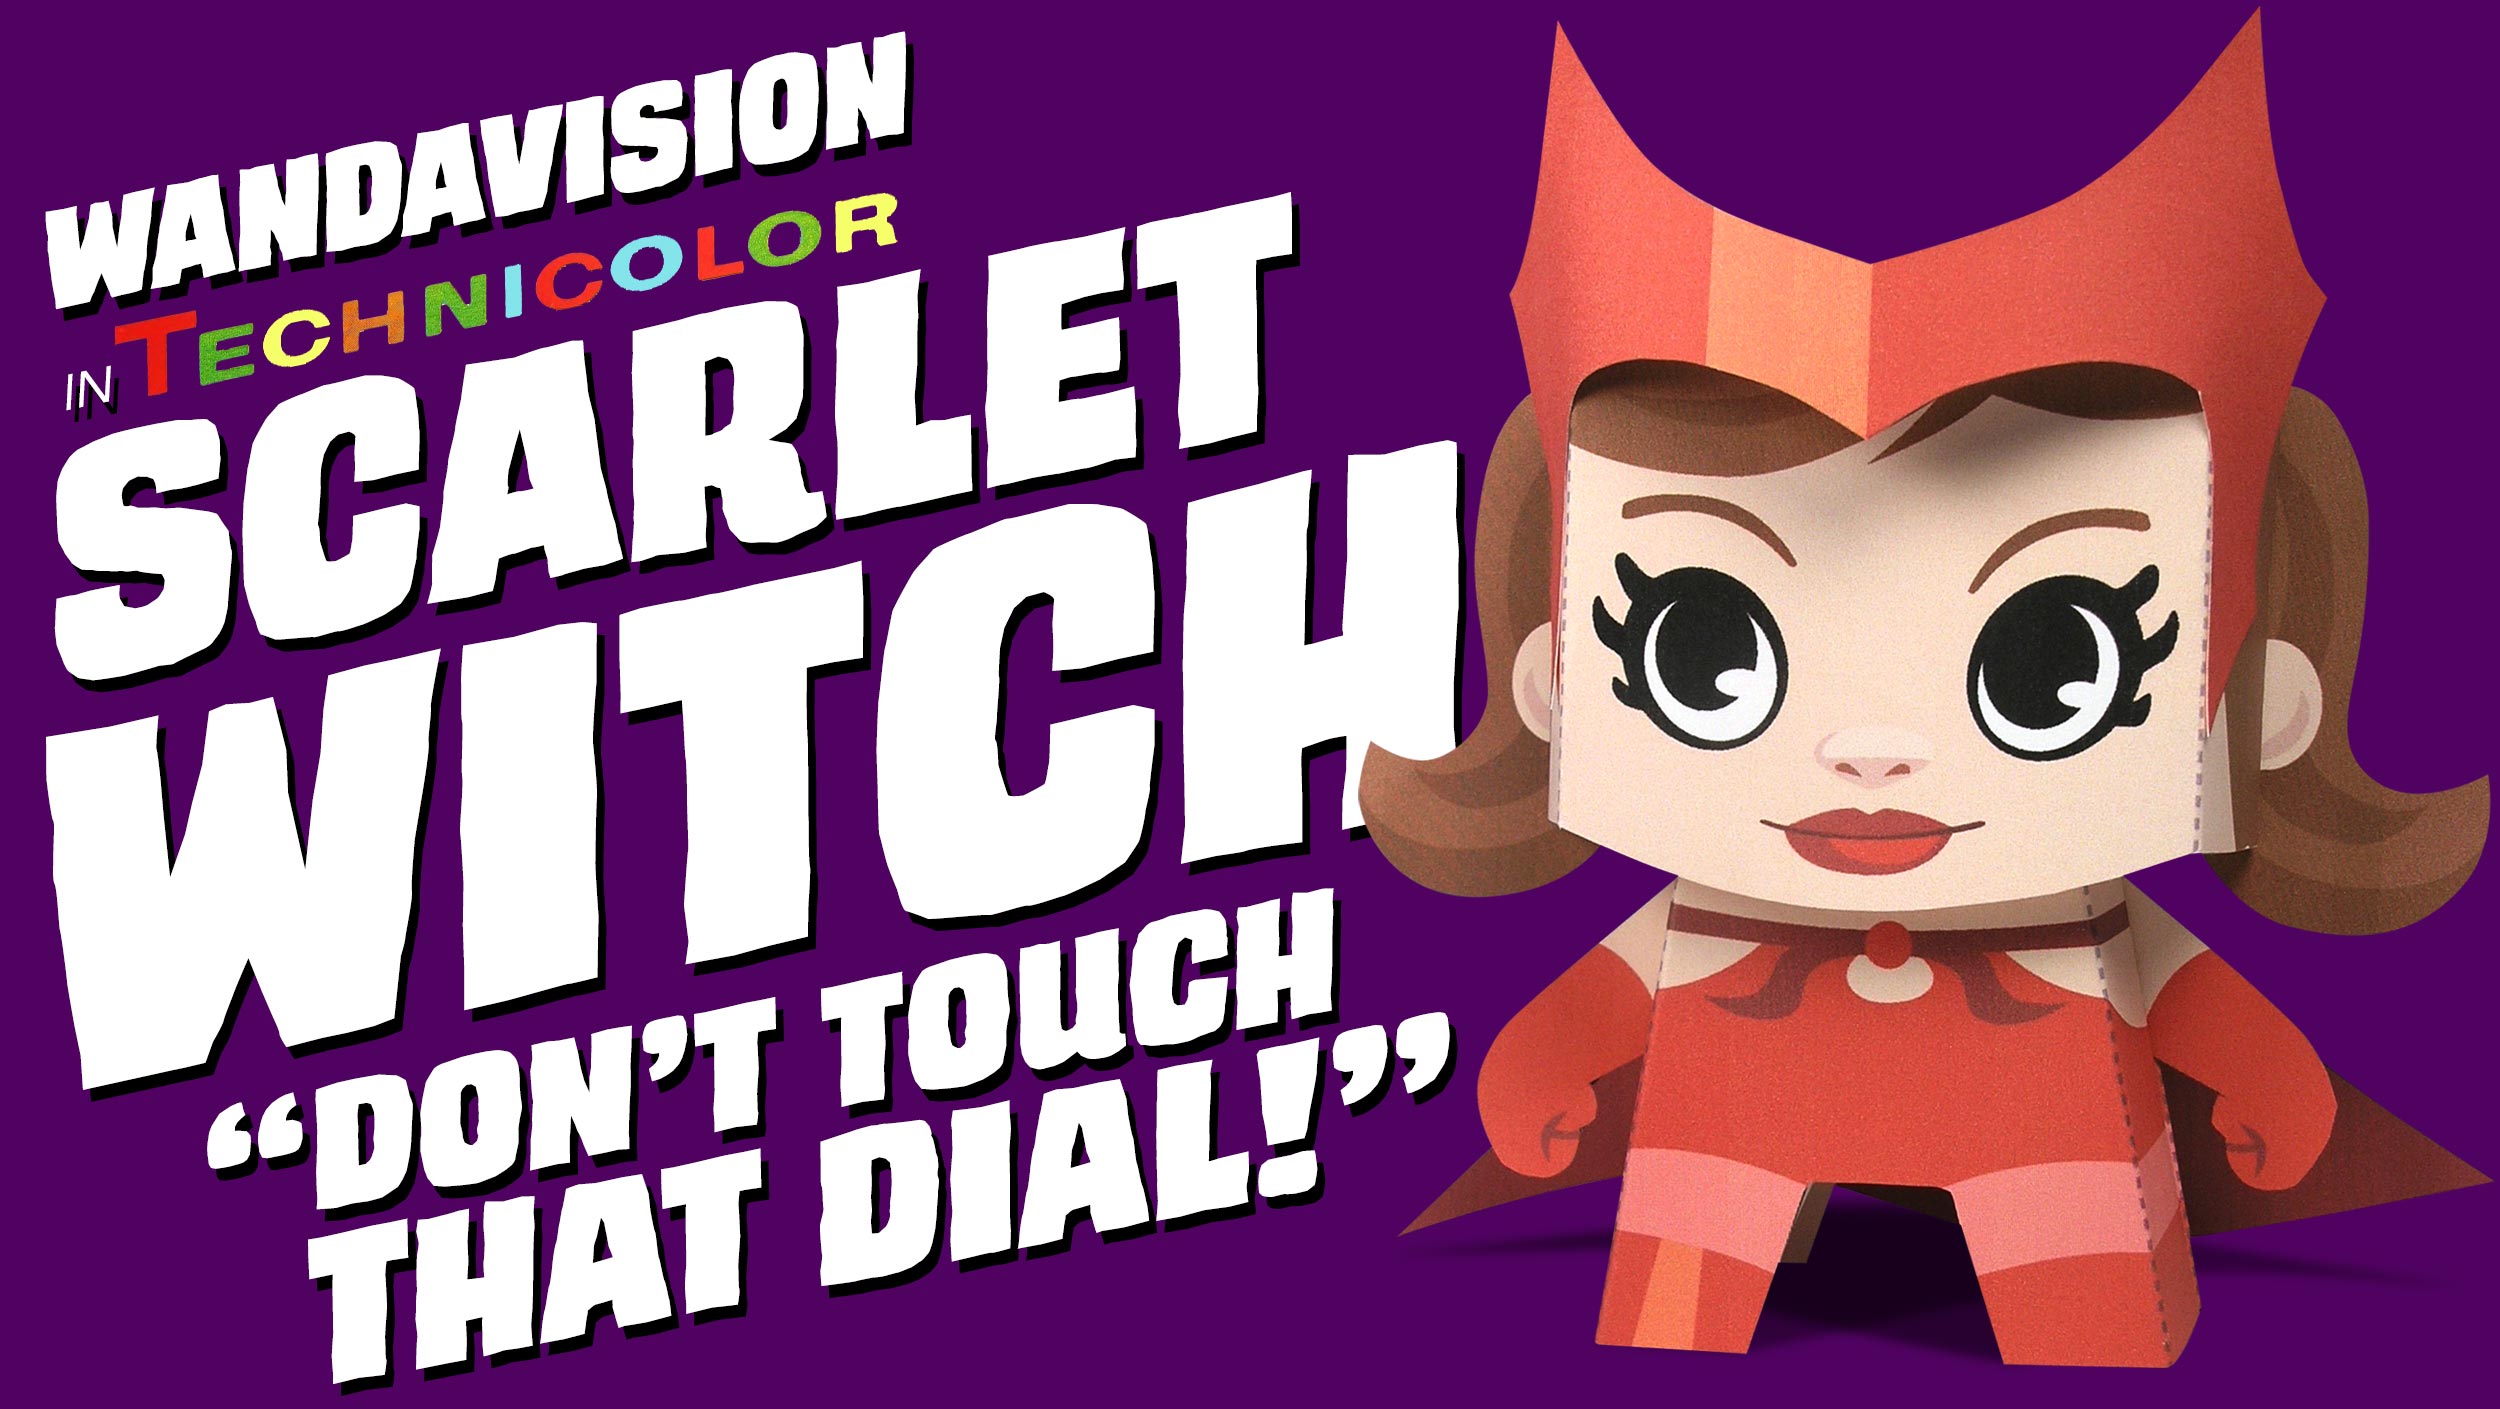 WandaVision Scarlet Witch Kooky Craftables Paper Craft